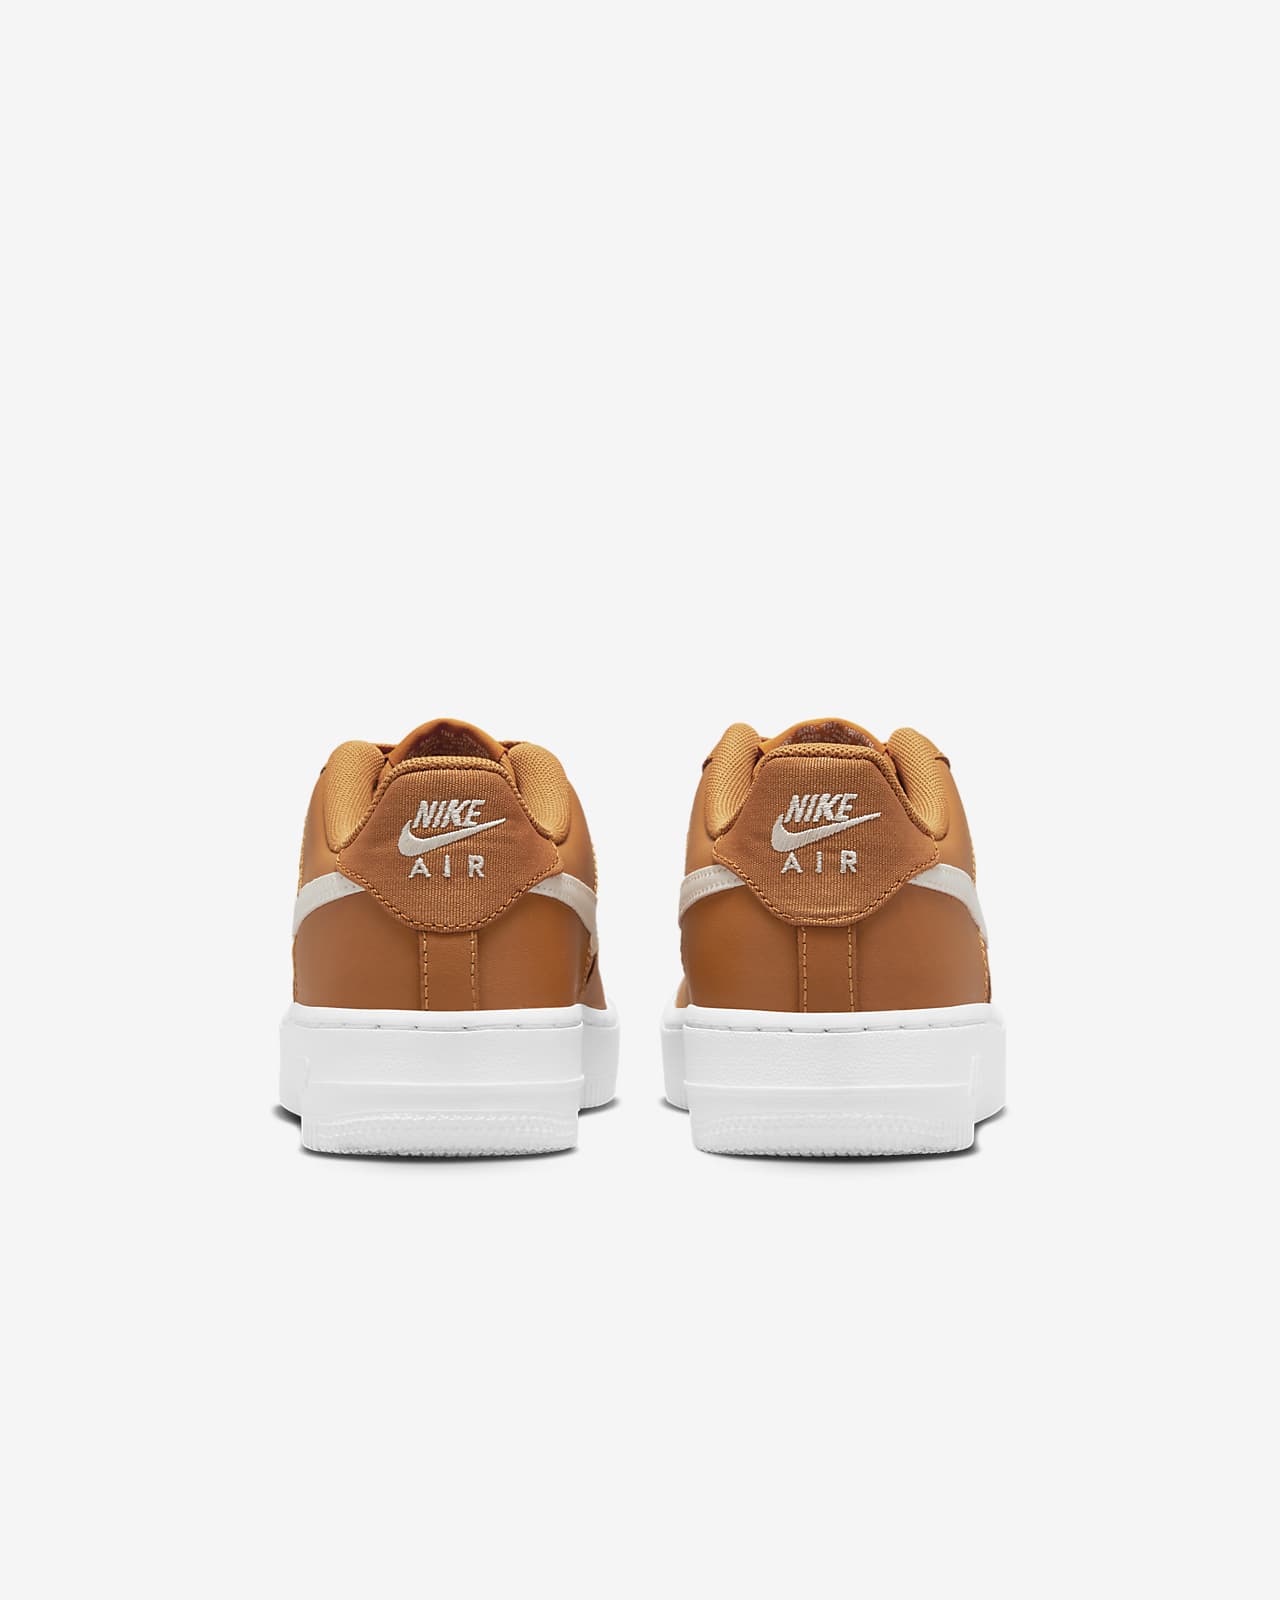 Shoes Nike Air Force 1 LV8 2 GS 